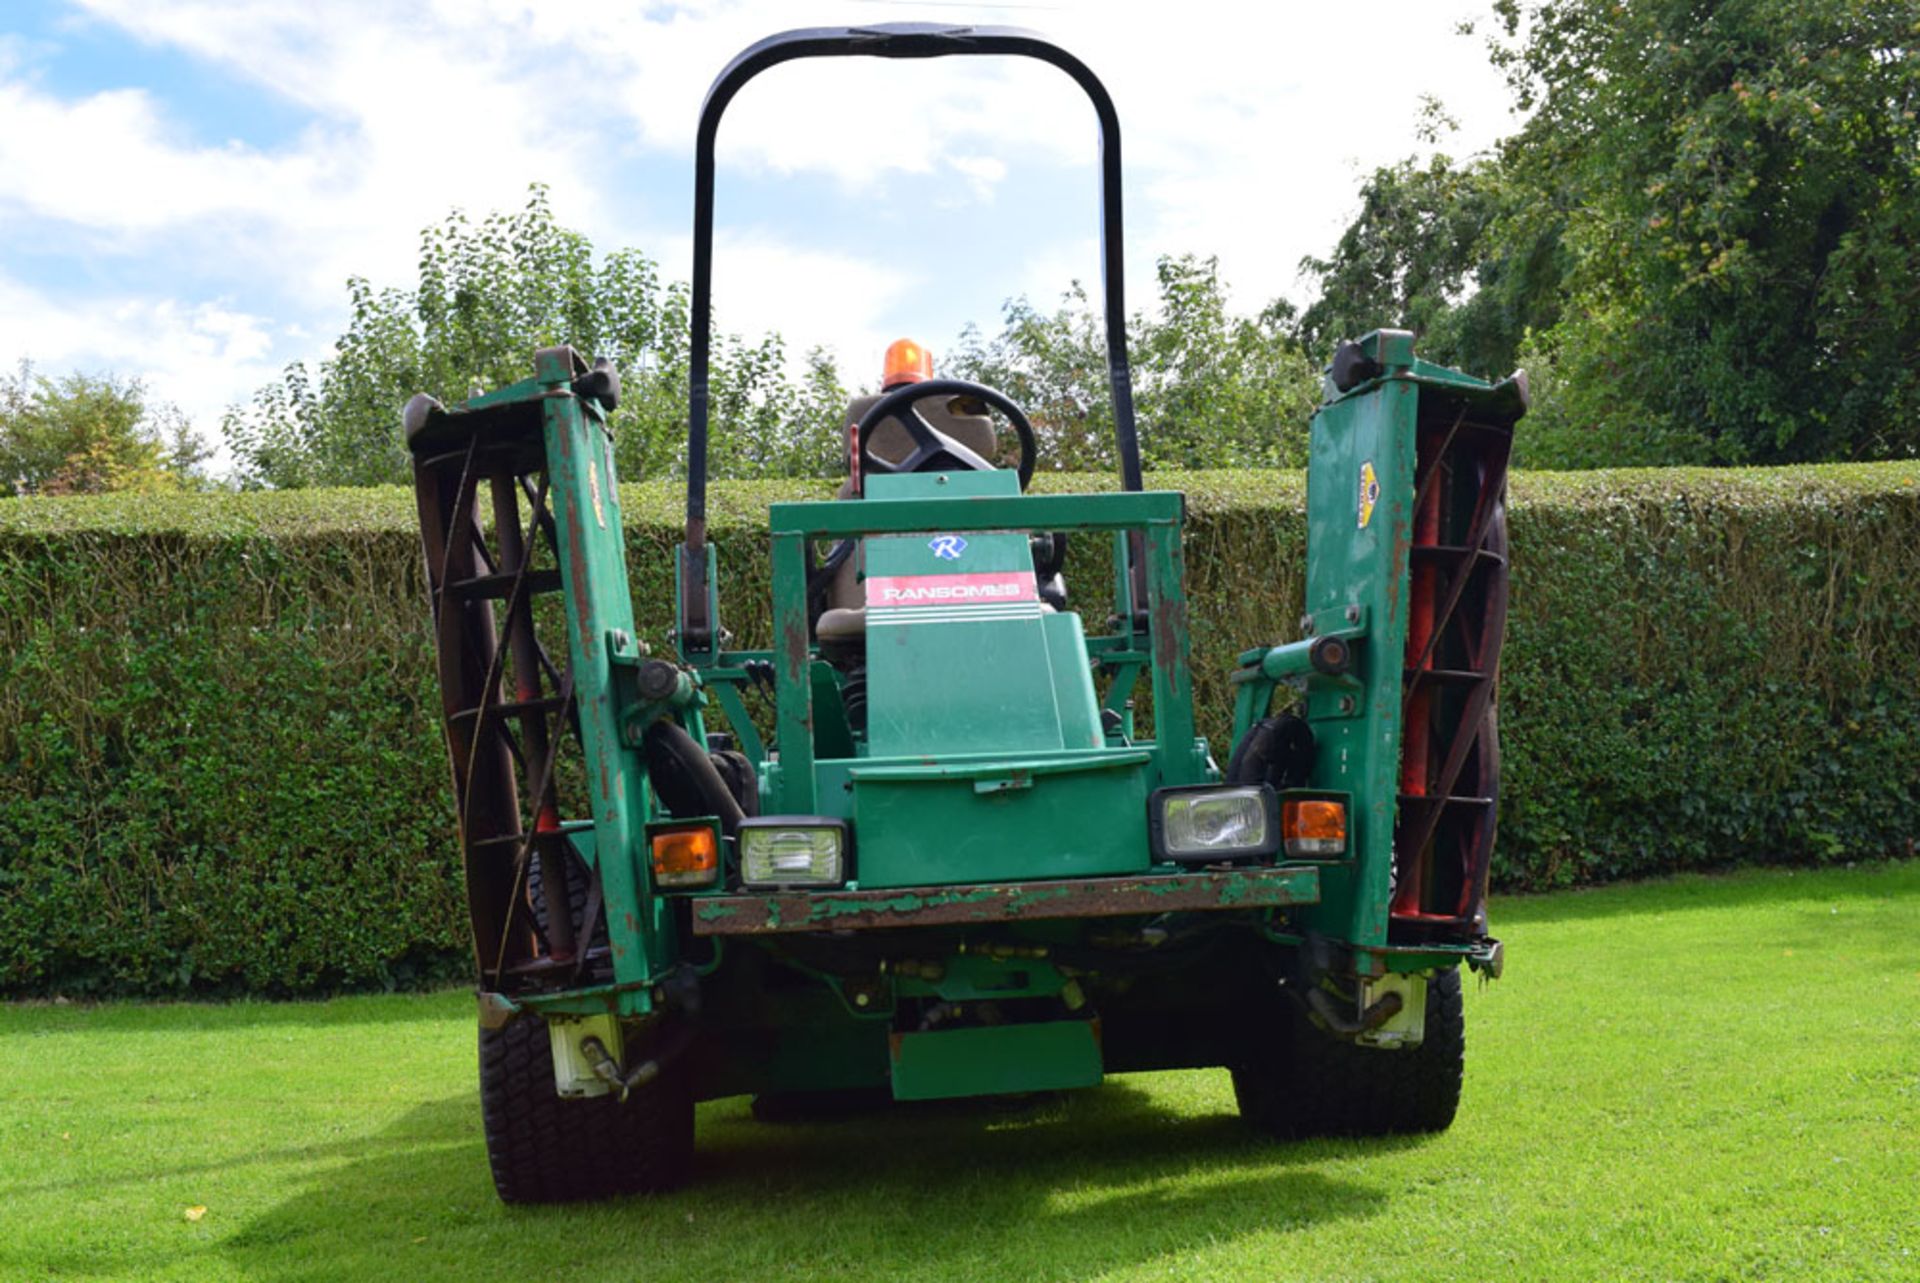 2003 Ransomes Parkway 2250 Plus Ride On Cylinder Mower - Image 3 of 3